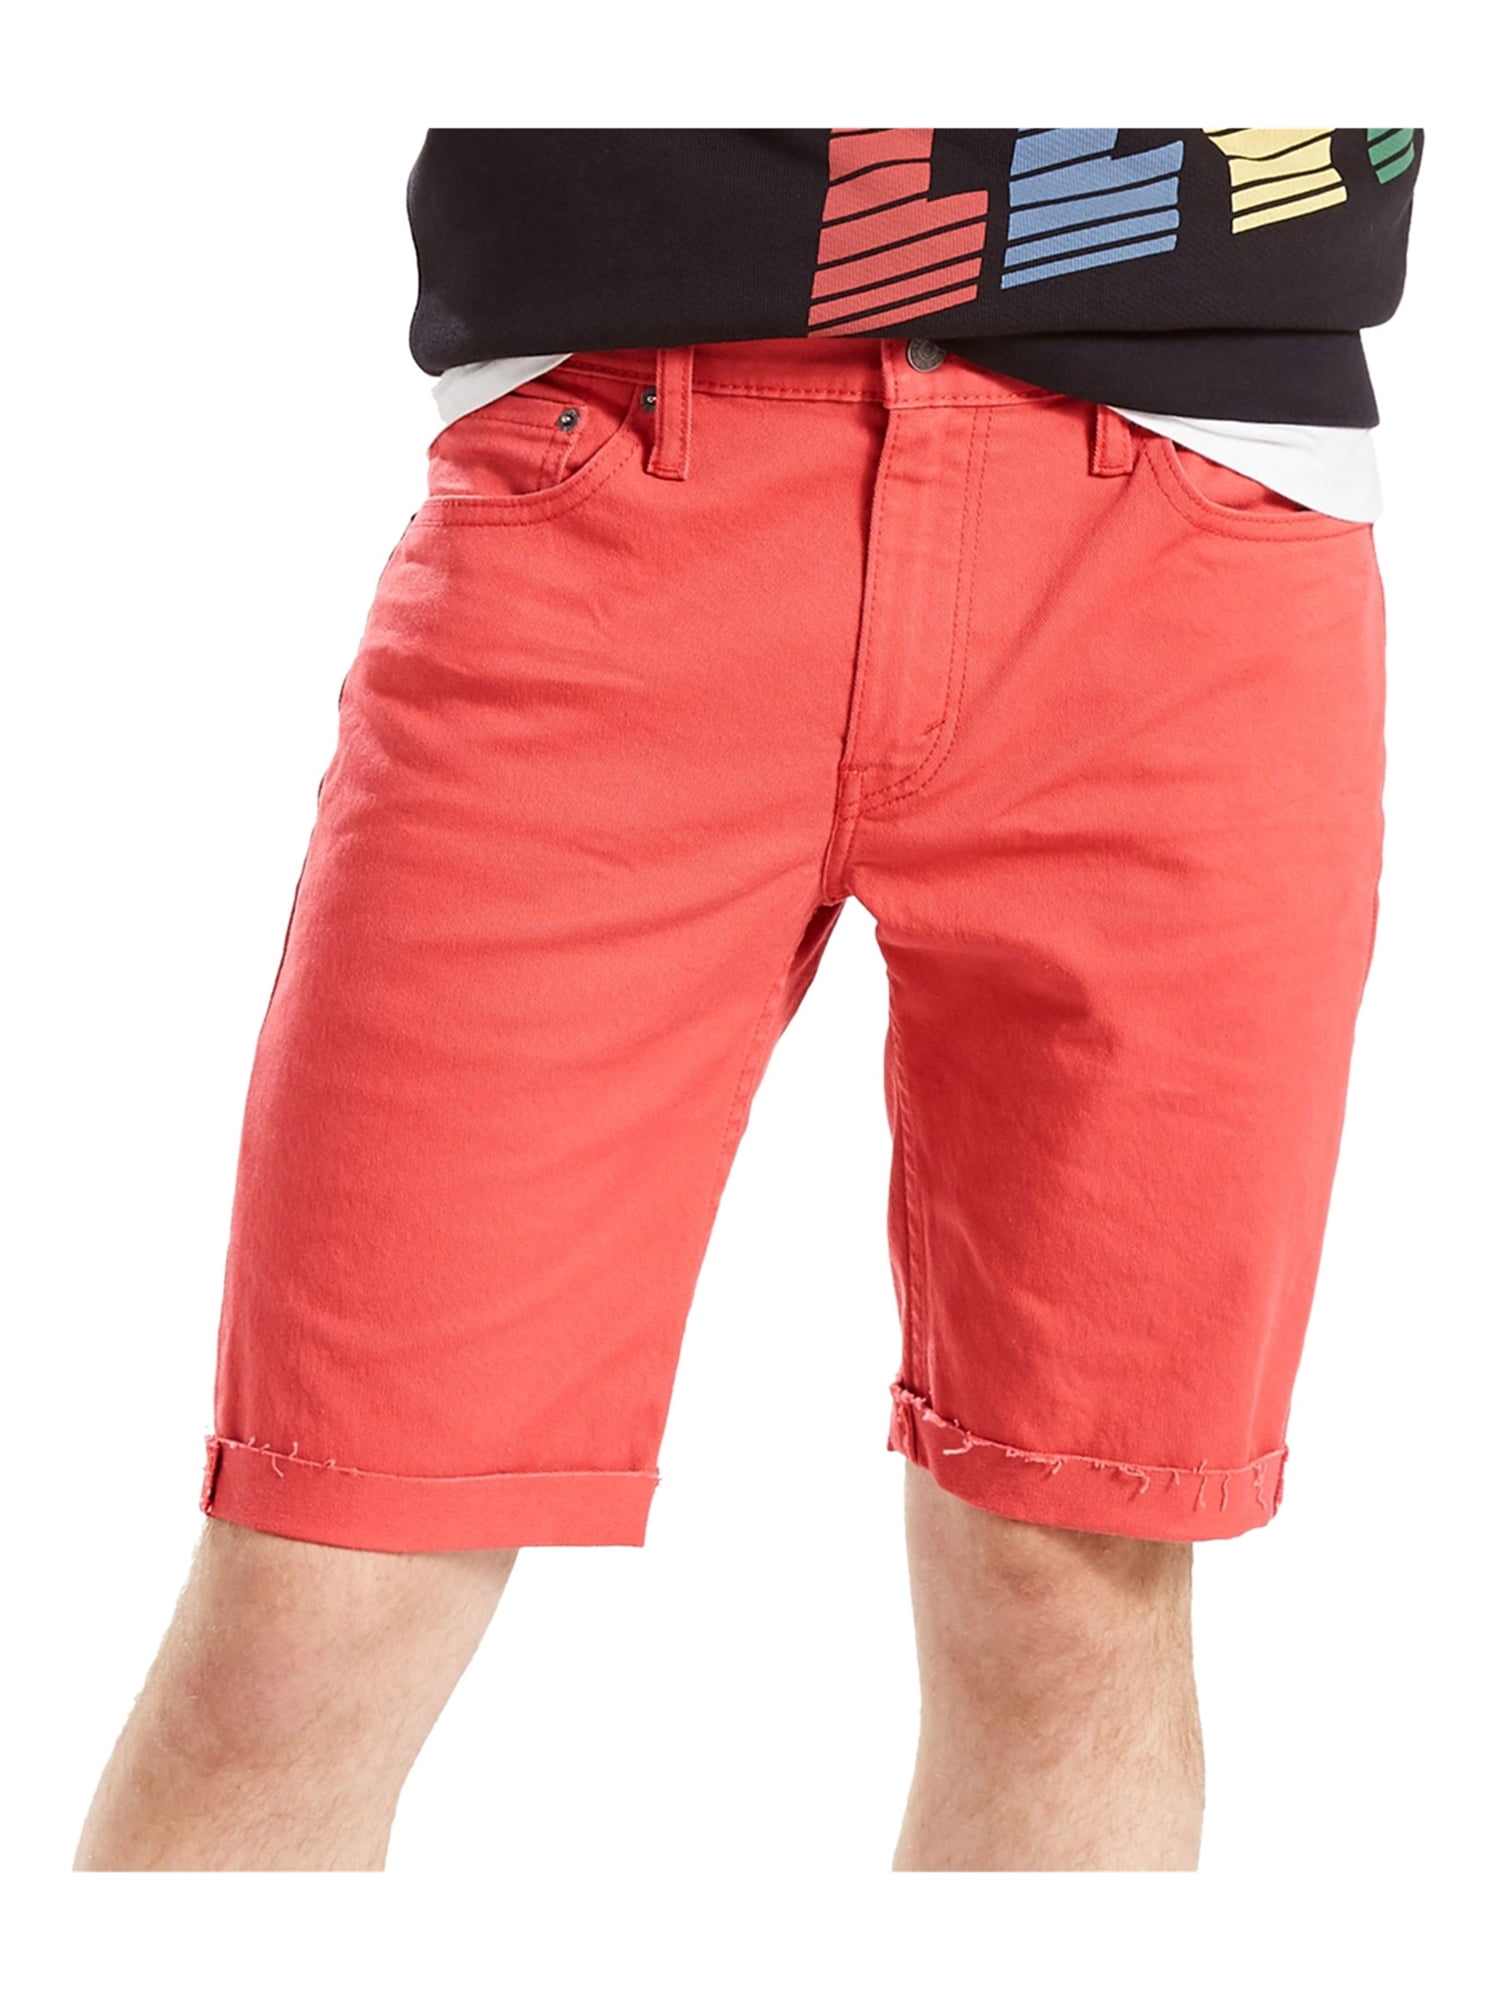 levi's red shorts